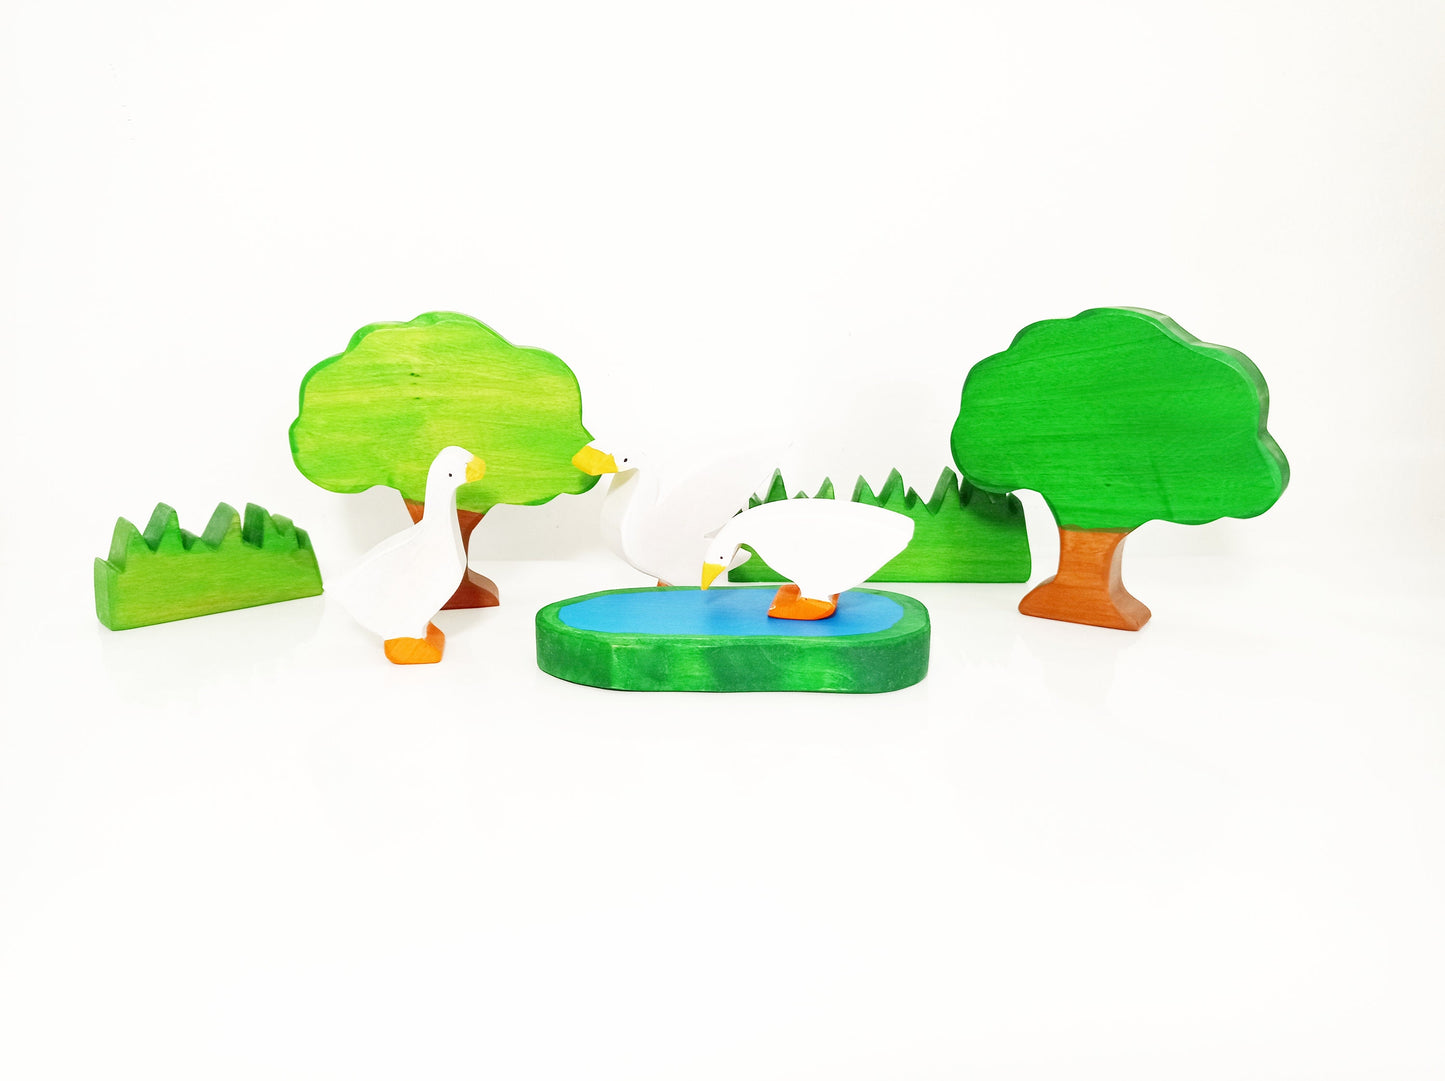 Geese with pond and trees, wooden farm scene toy, waldorf inspired wooden toy set, wooden geese, gift for kids, wooden farm toys